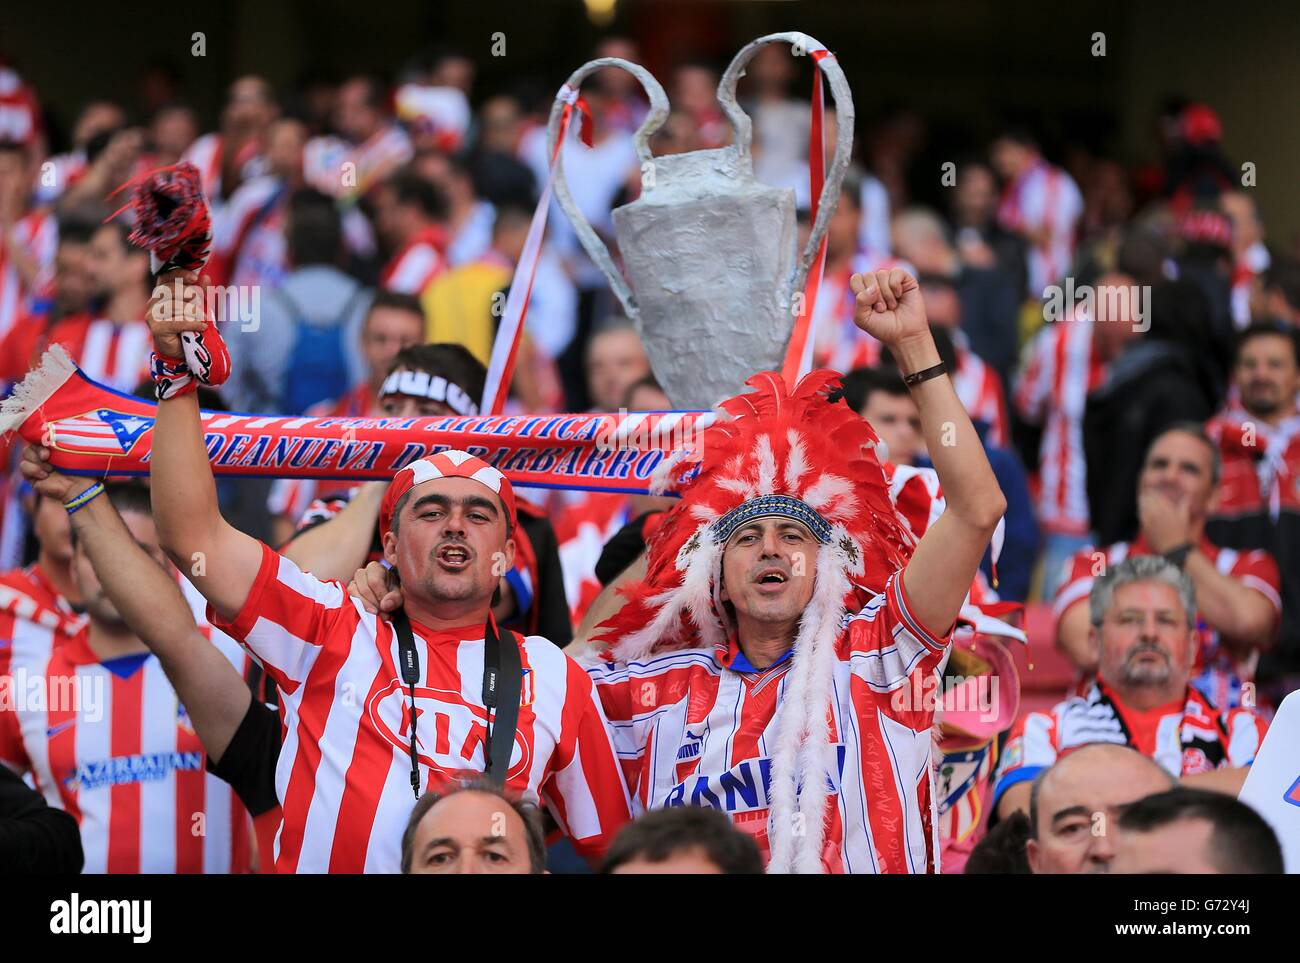 mærke navn Flipper Evolve Atletico Madrid fans show support for their team in the stands Stock Photo  - Alamy